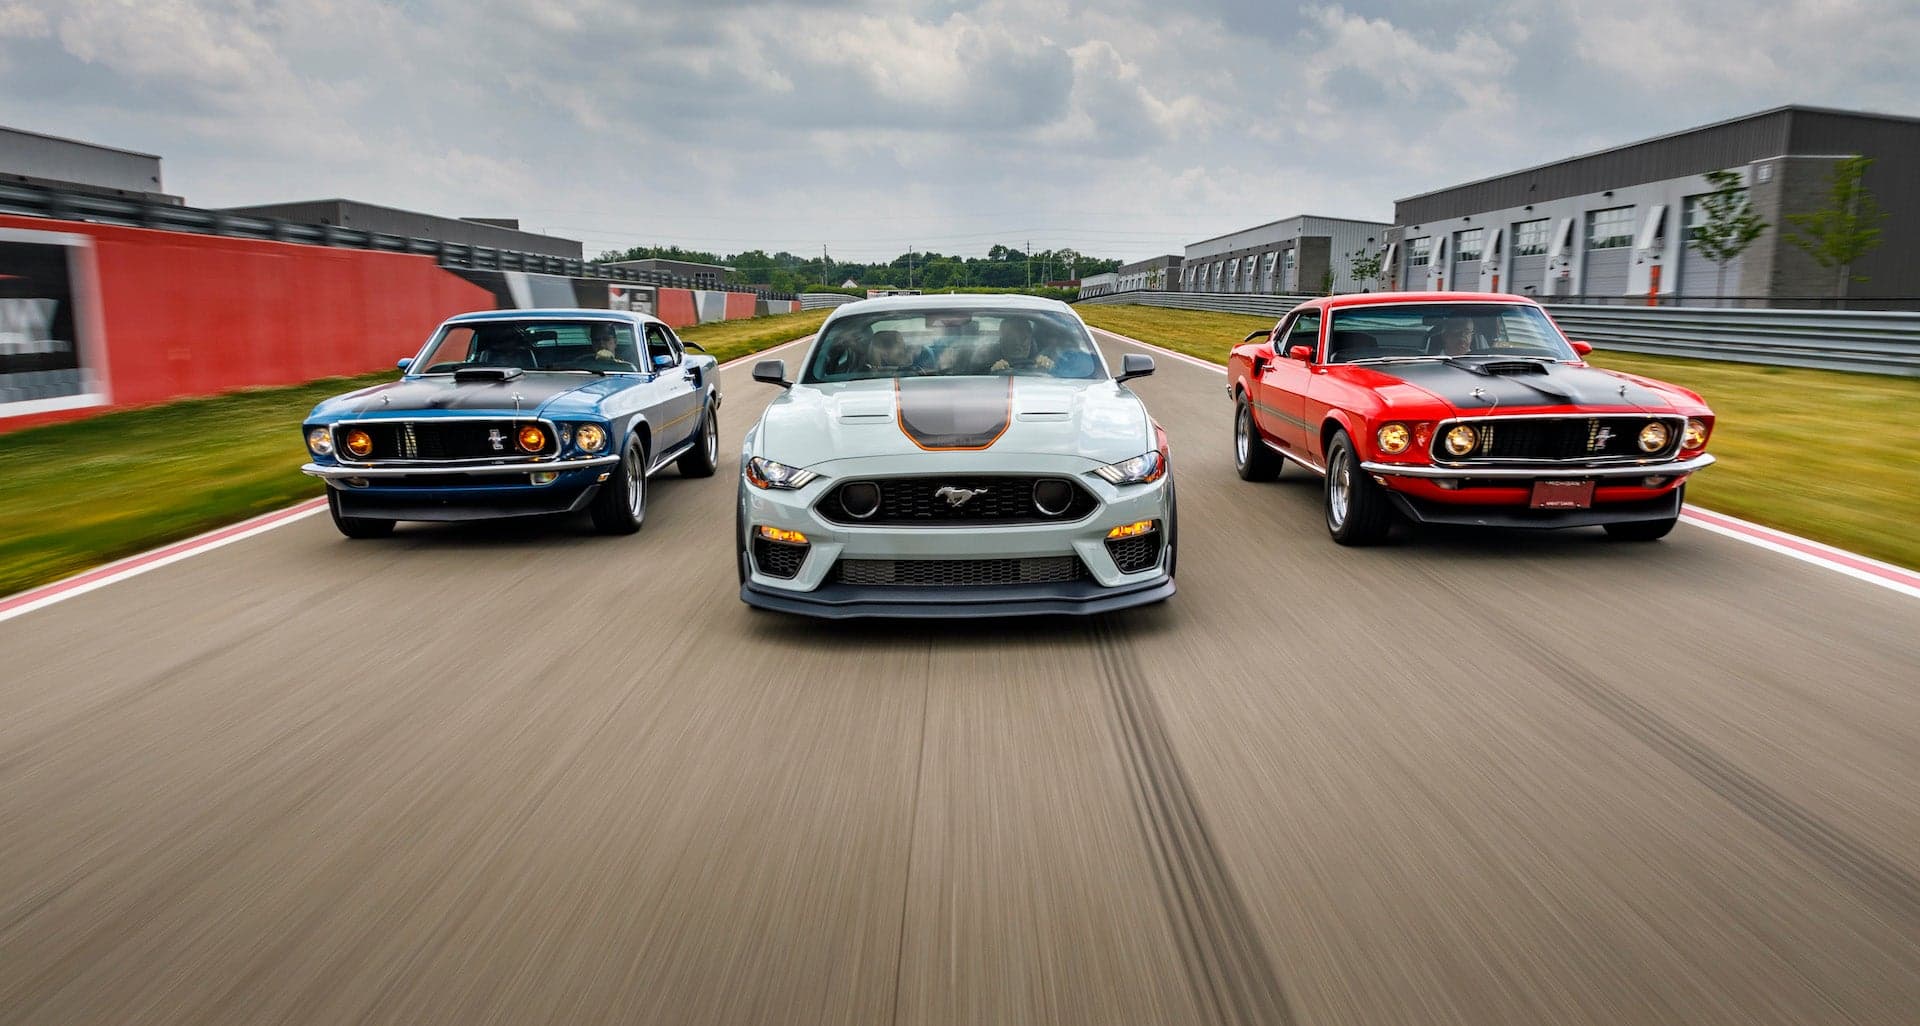 2021 Ford Mustang Mach 1: Here’s What They Took From the Shelby GT350 and GT500